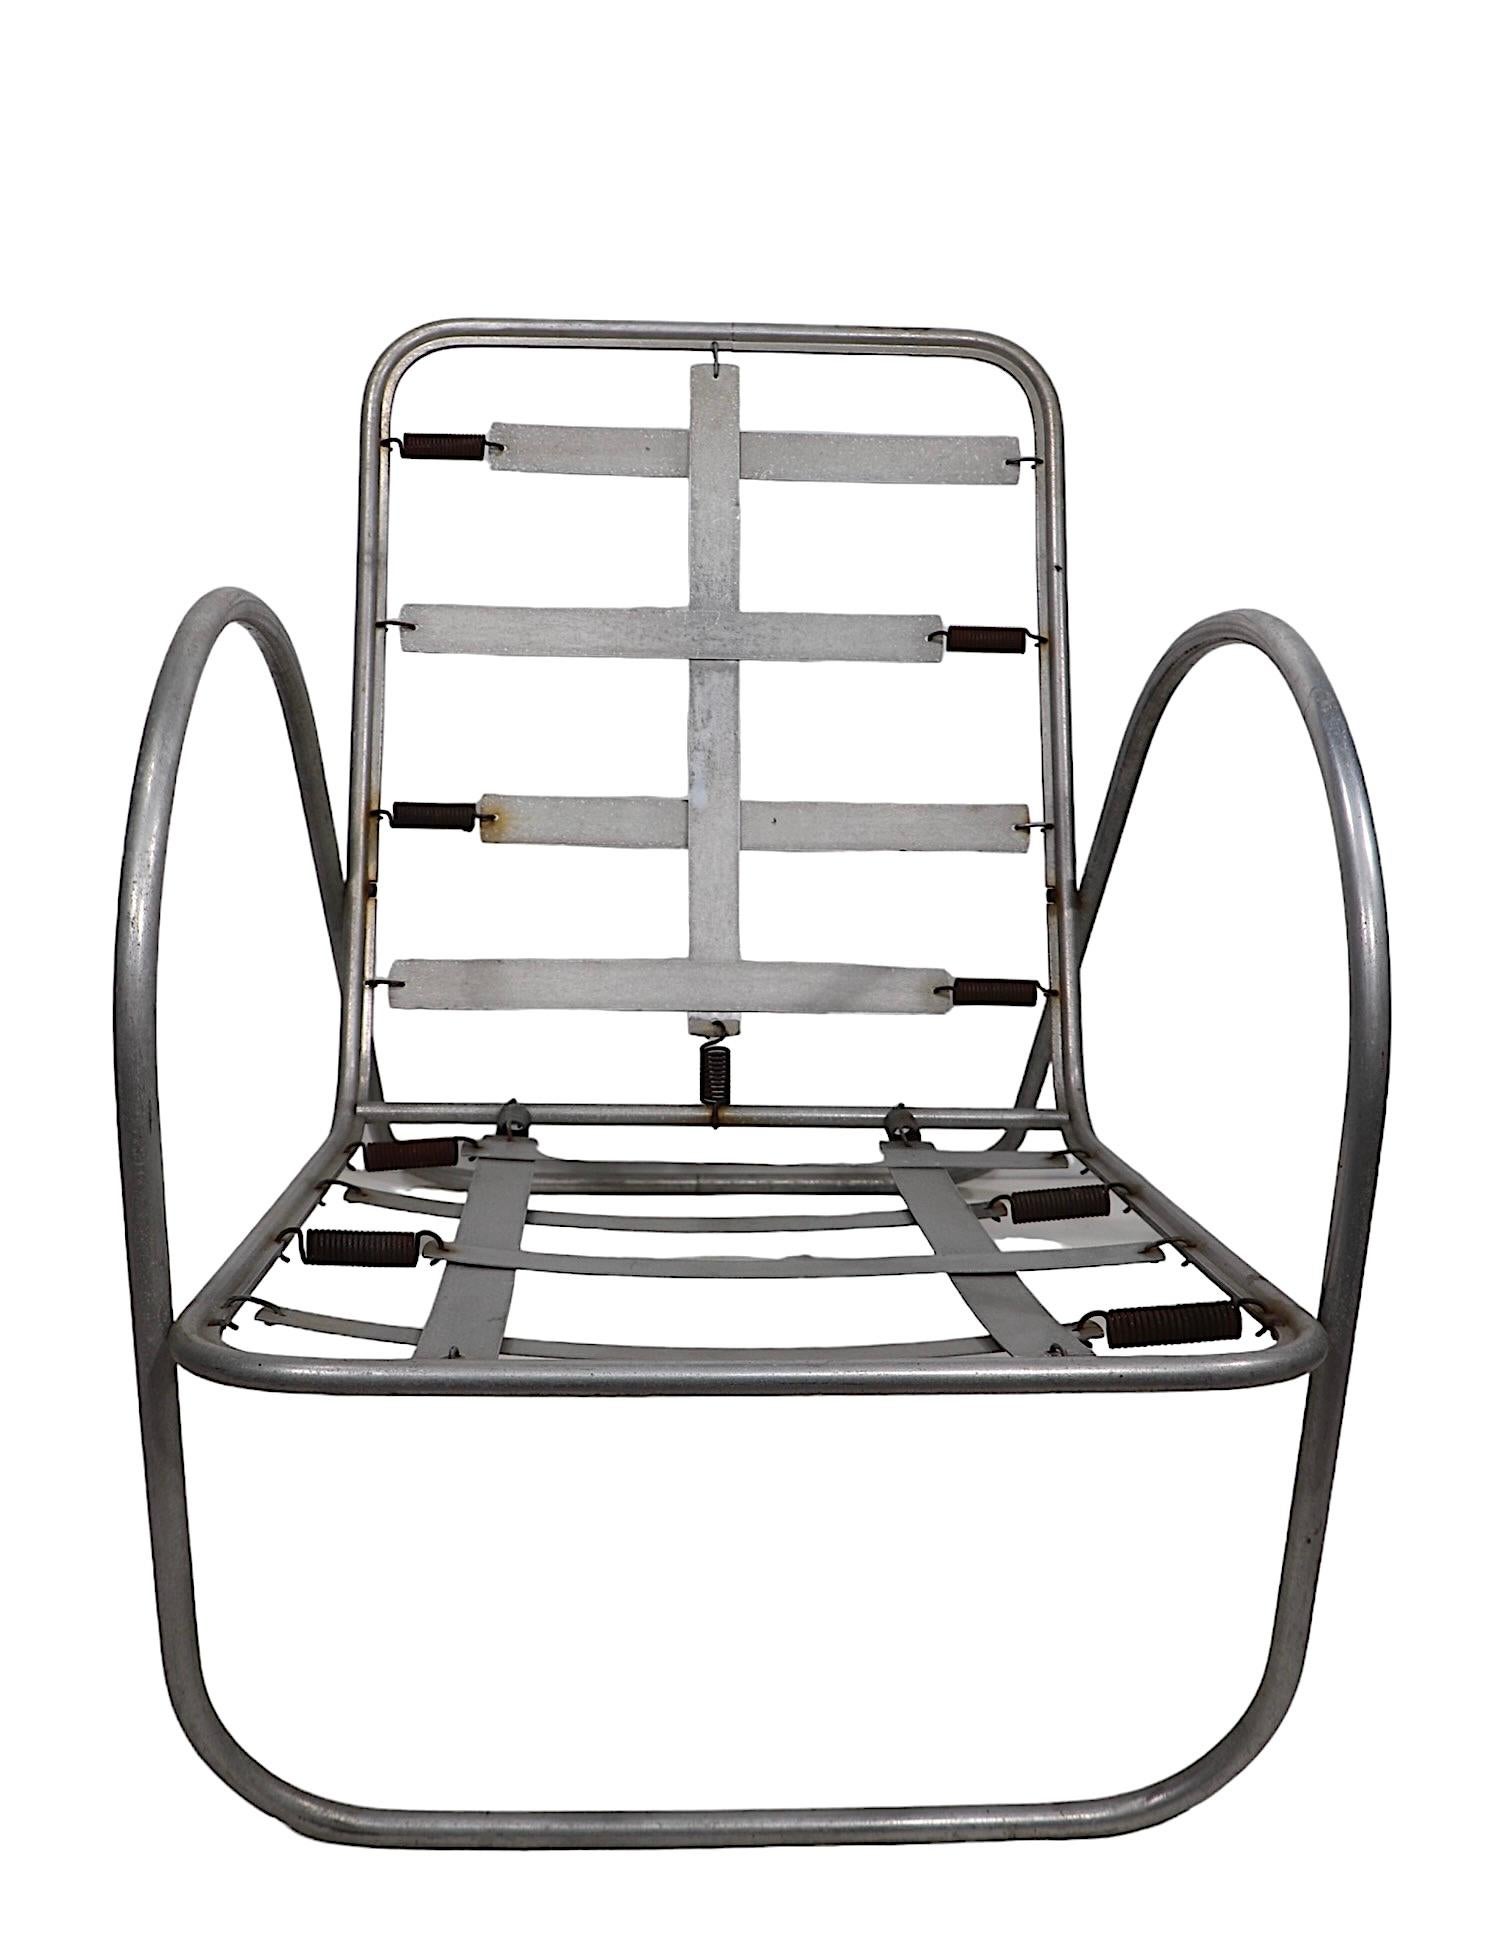 Streamline Design Aluminum Patio Poolside Lounge Chair  Richard Neutra  1930/40s In Good Condition For Sale In New York, NY